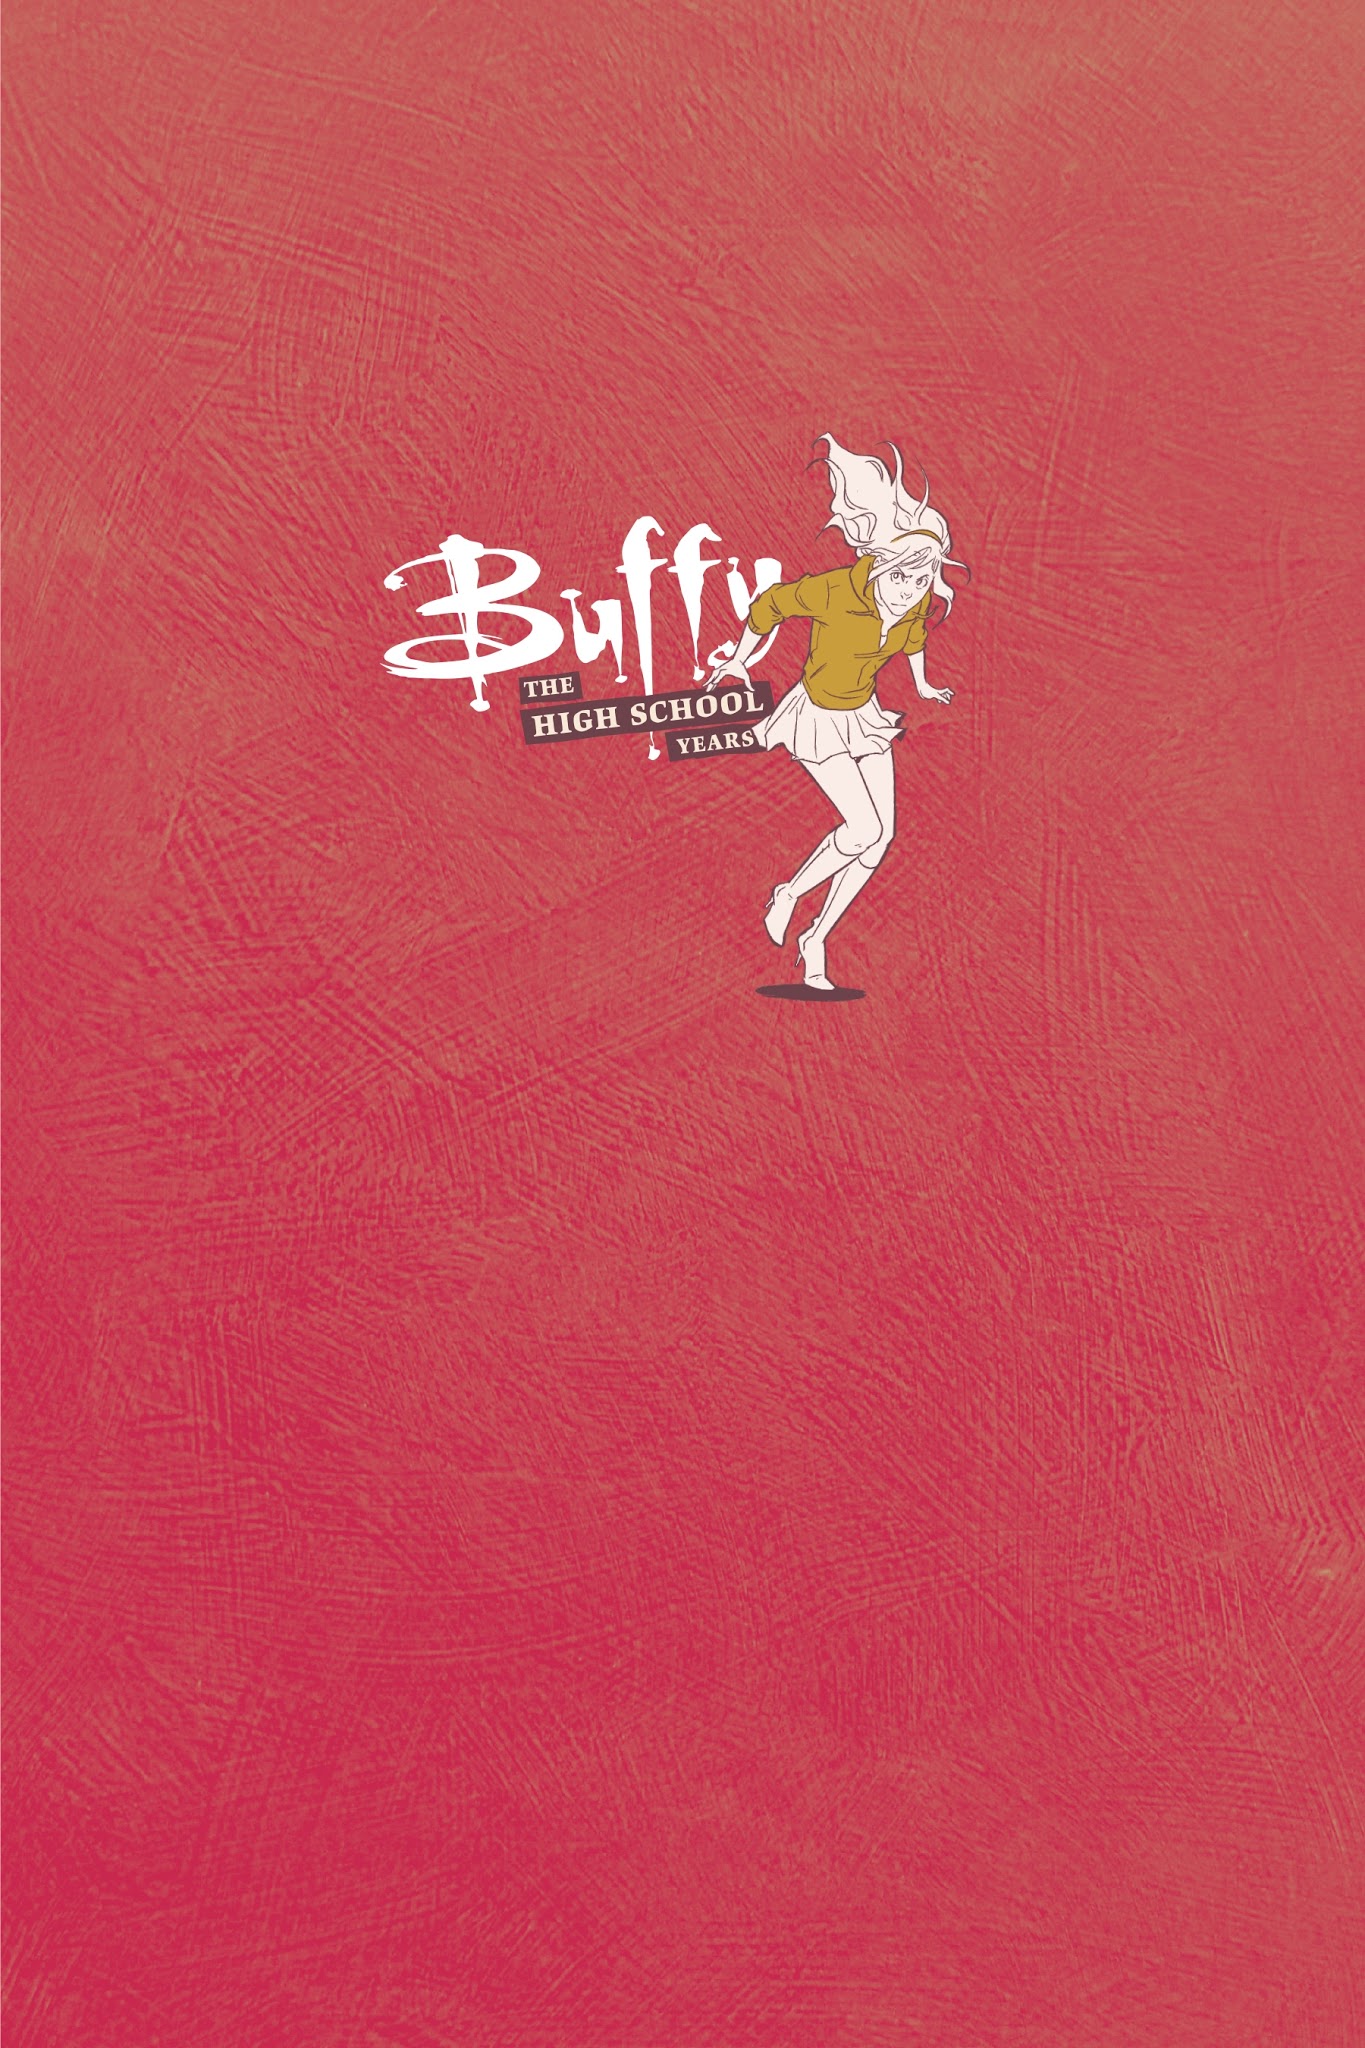 Read online Buffy: The High School Years comic -  Issue # TPB 3 - 7